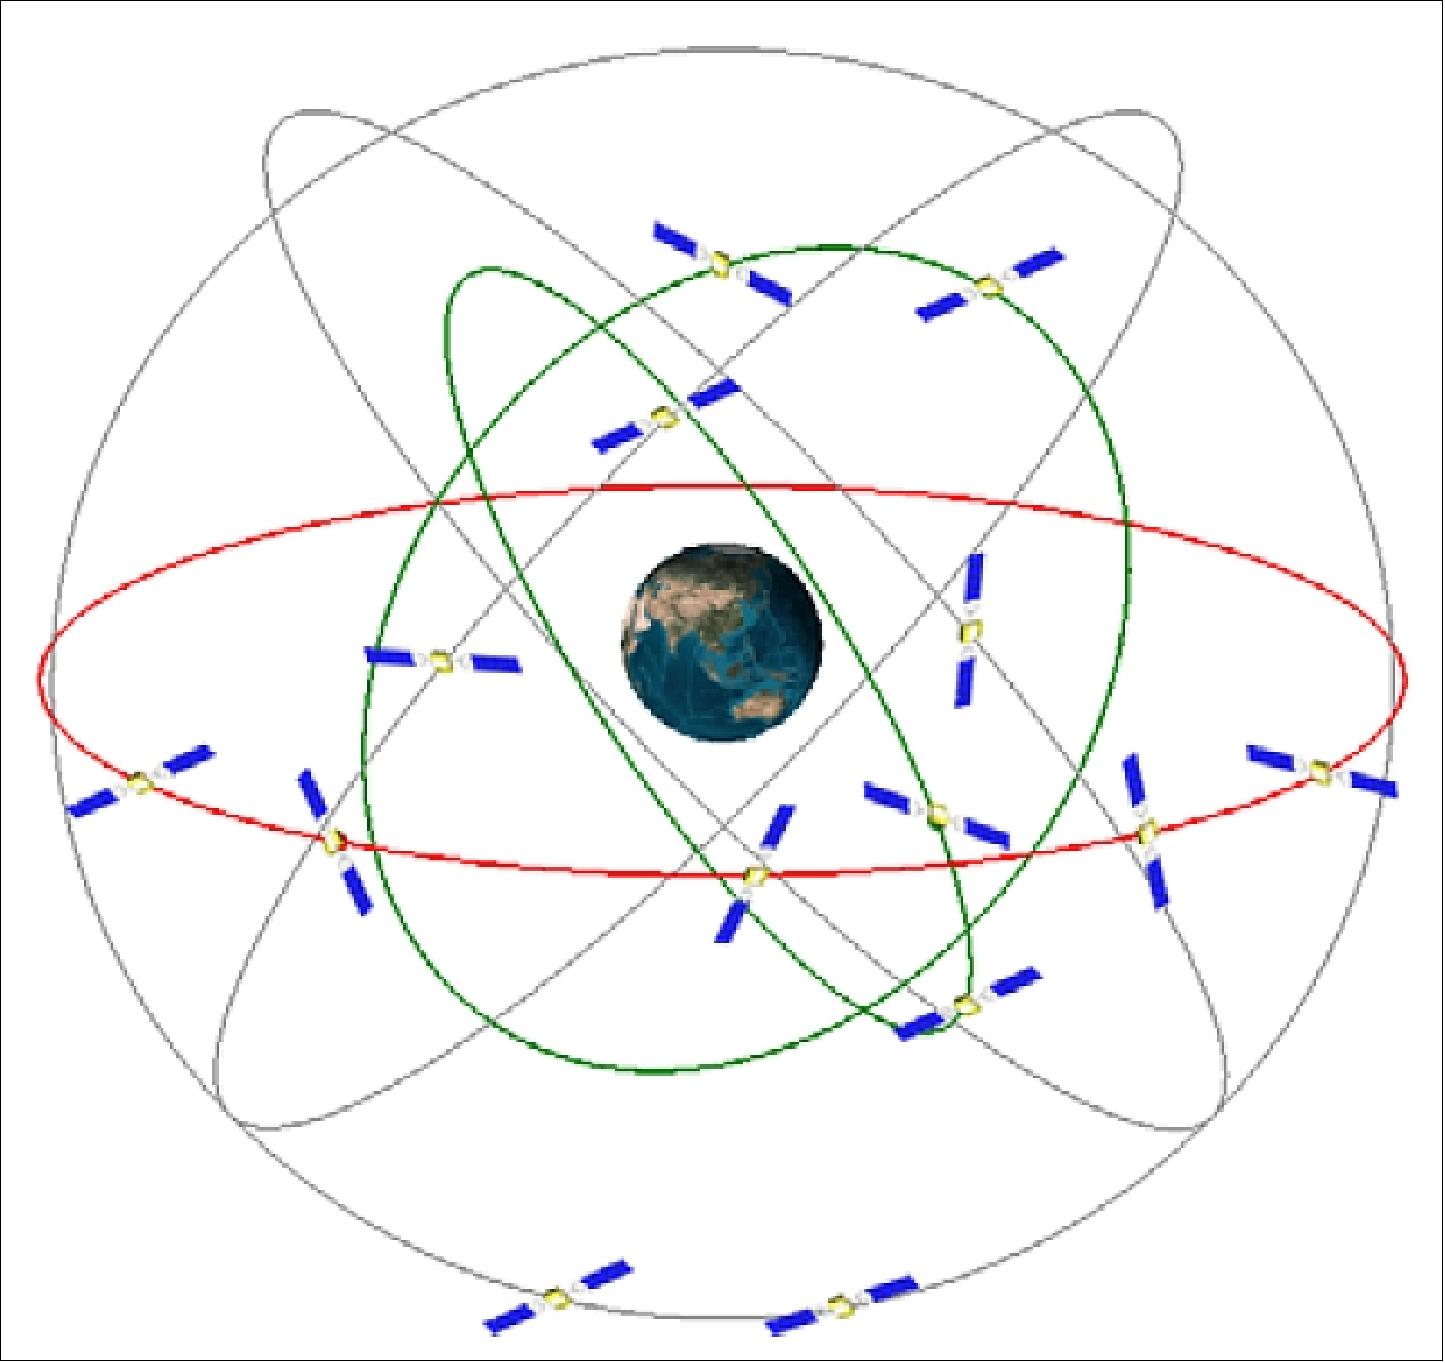 Figure 9: The BDS constellation as of December 2012 (image credit: CSNPC)